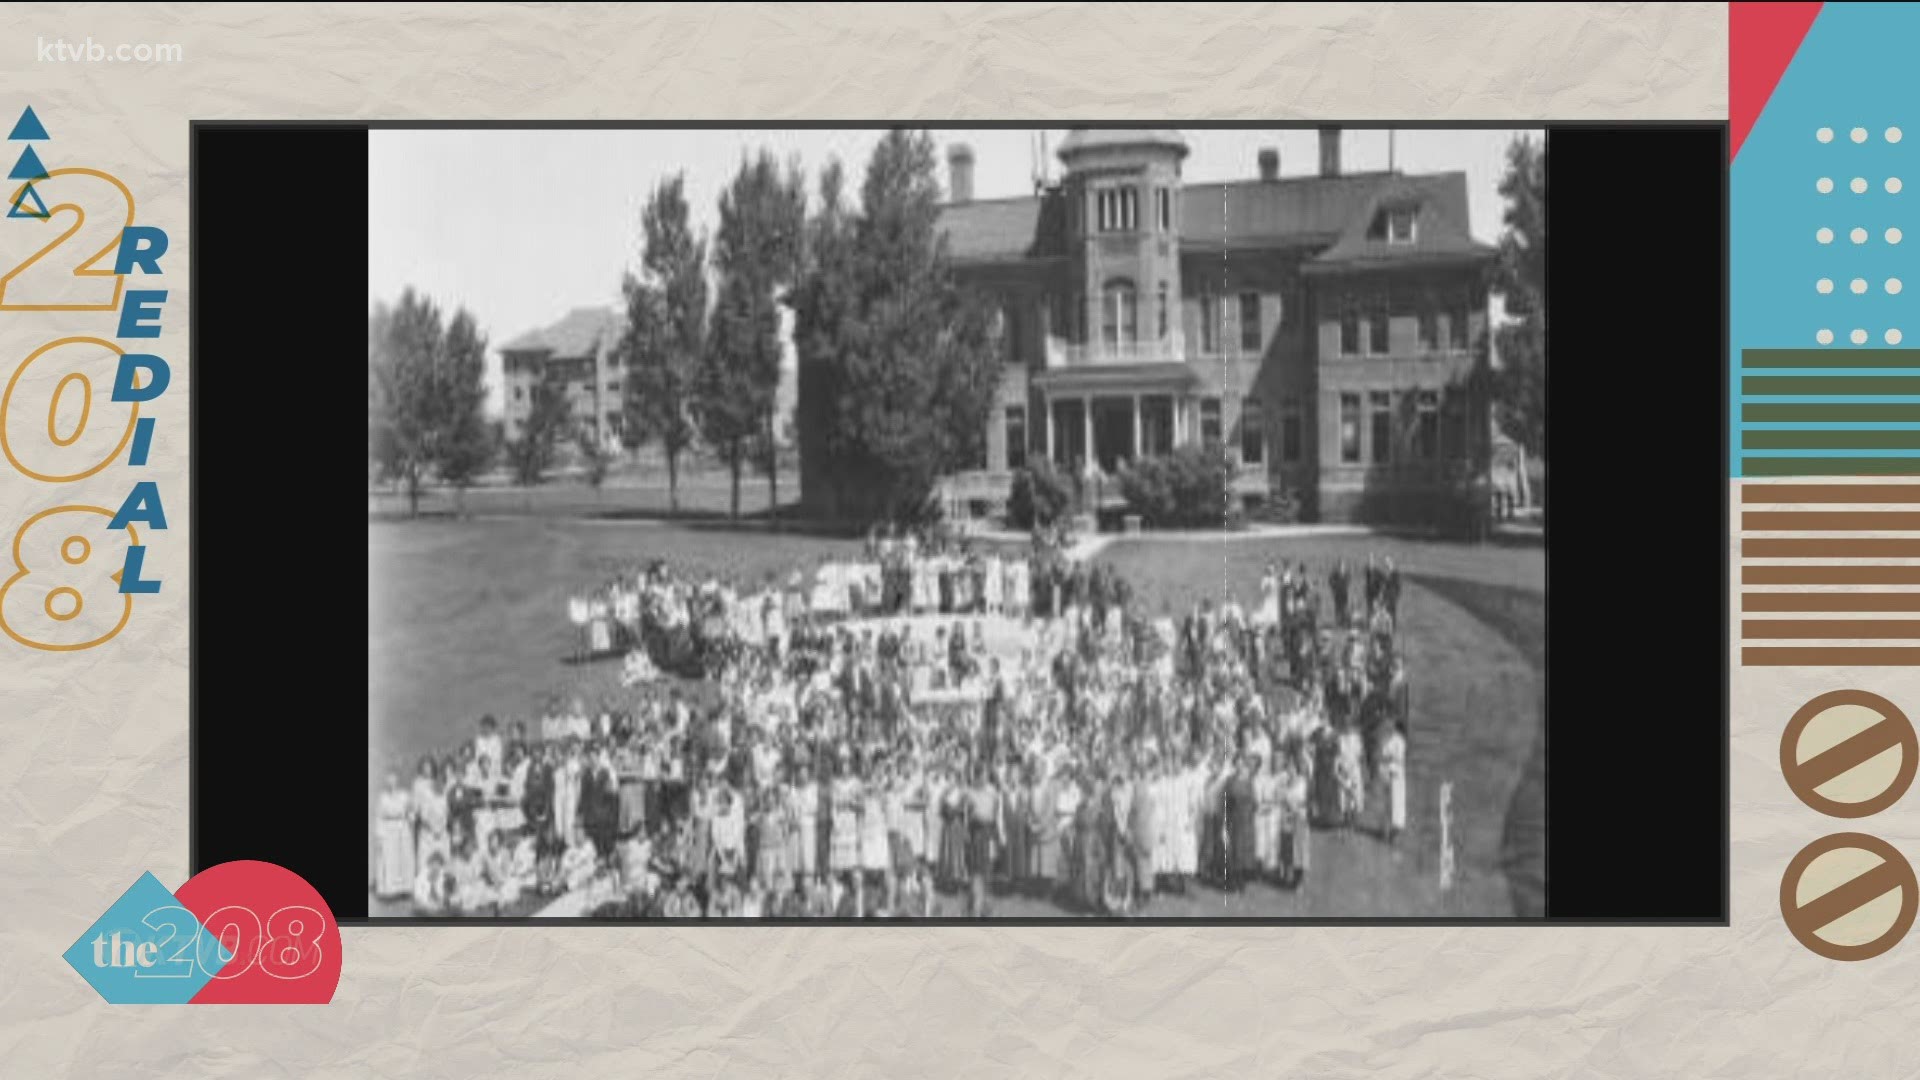 Albion State Normal School was a two-year college opened in 1893 to teach Idaho's future teachers. It closed in 1951, but some students may not have left.